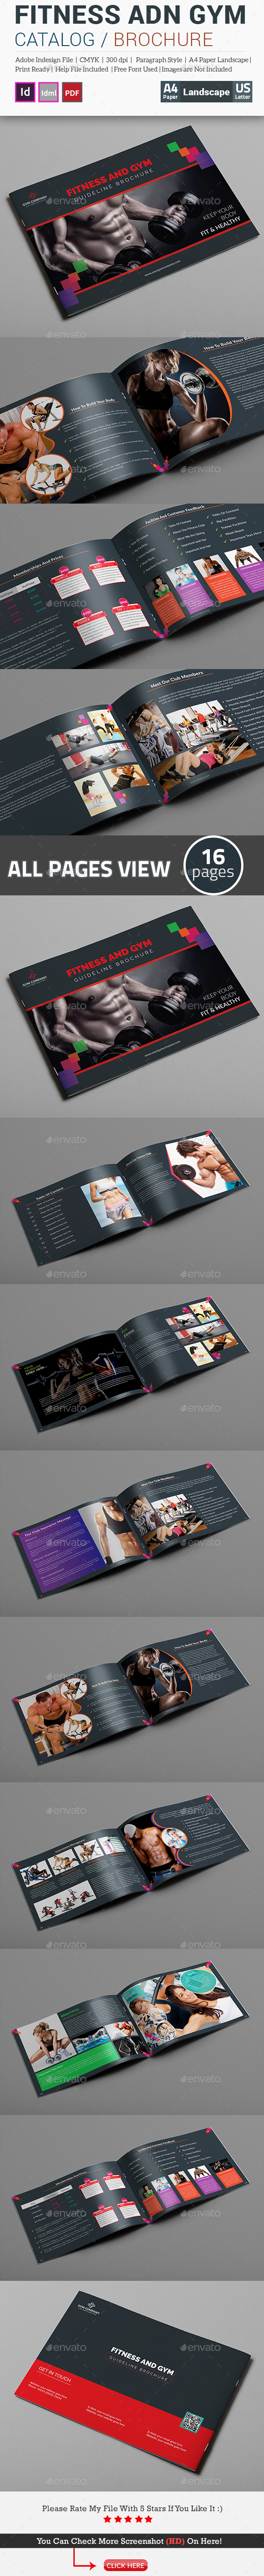 Fitness and Gym Guideline Brochure Template